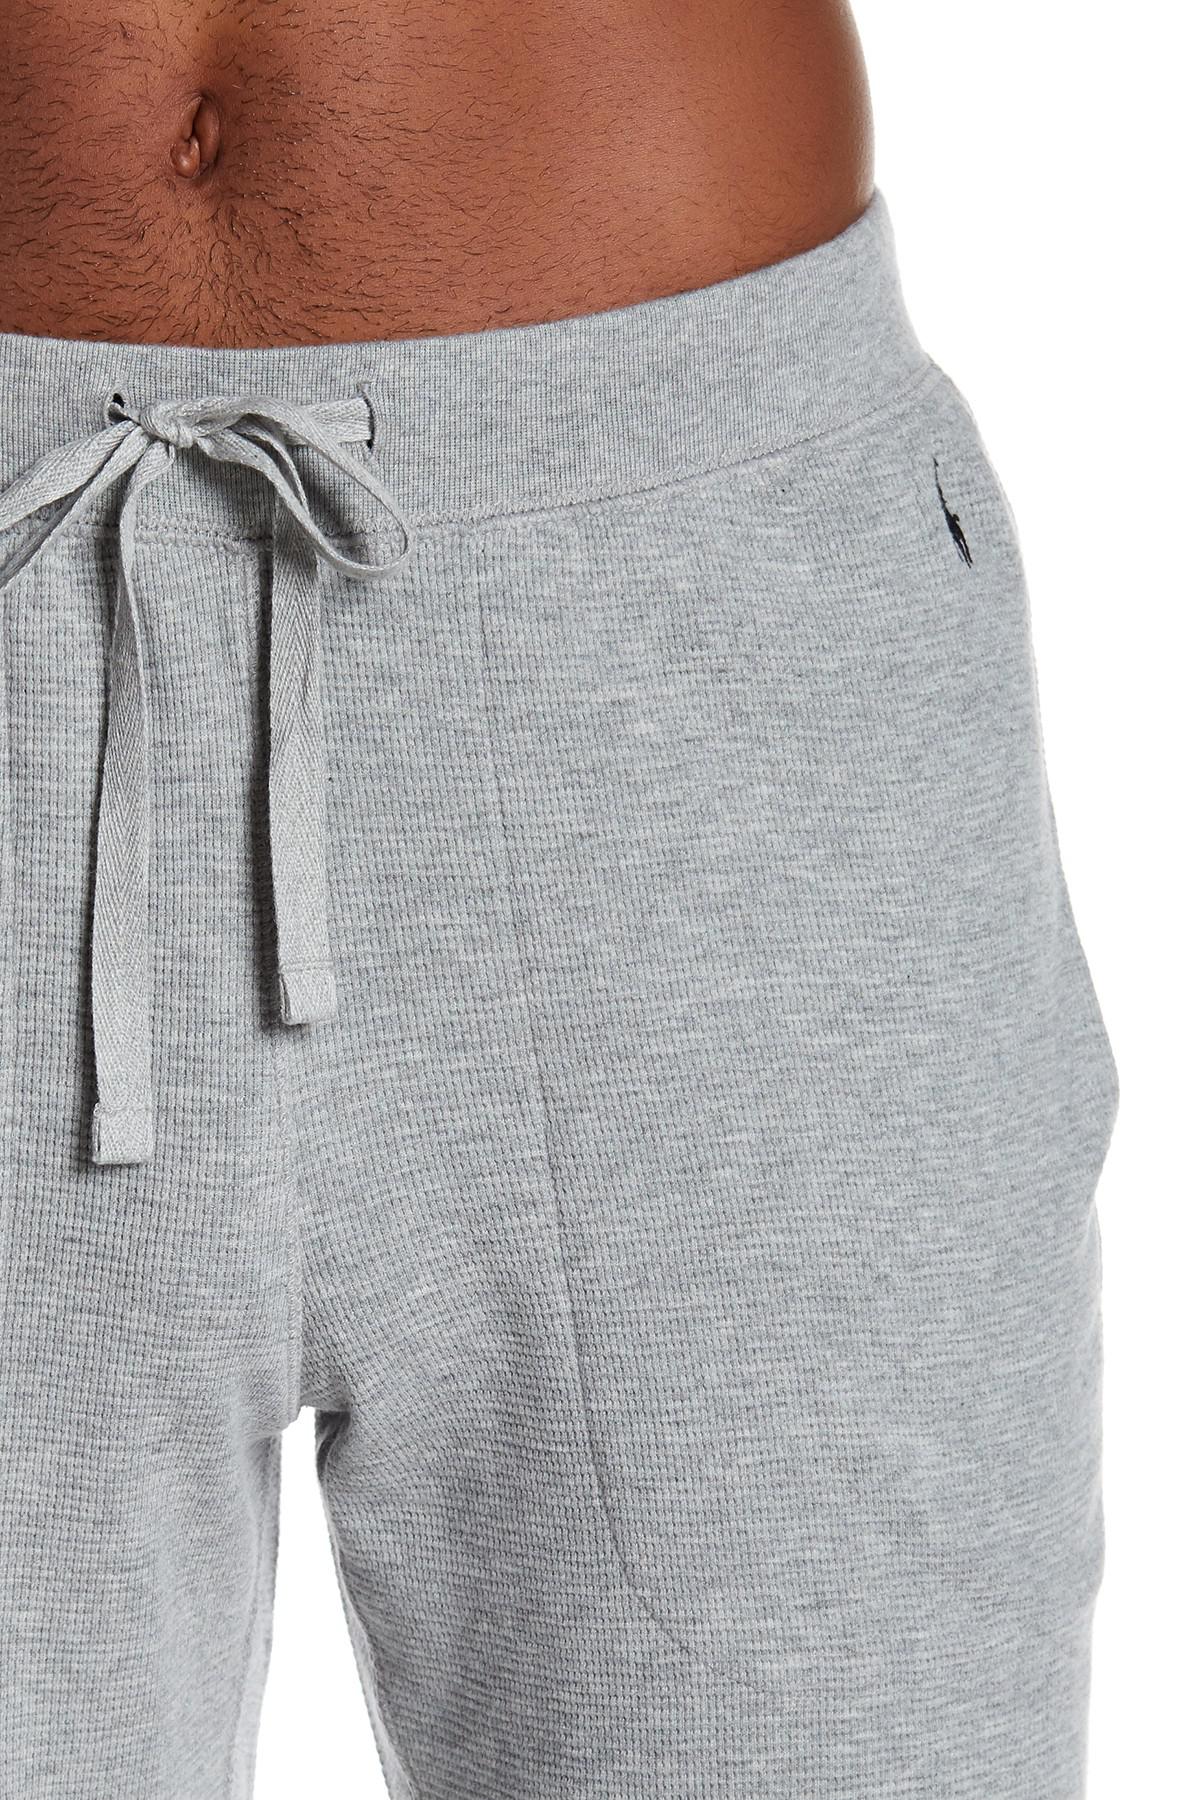 Polo Ralph Lauren Cotton Waffle Knit Joggers in Gray for Men - Lyst